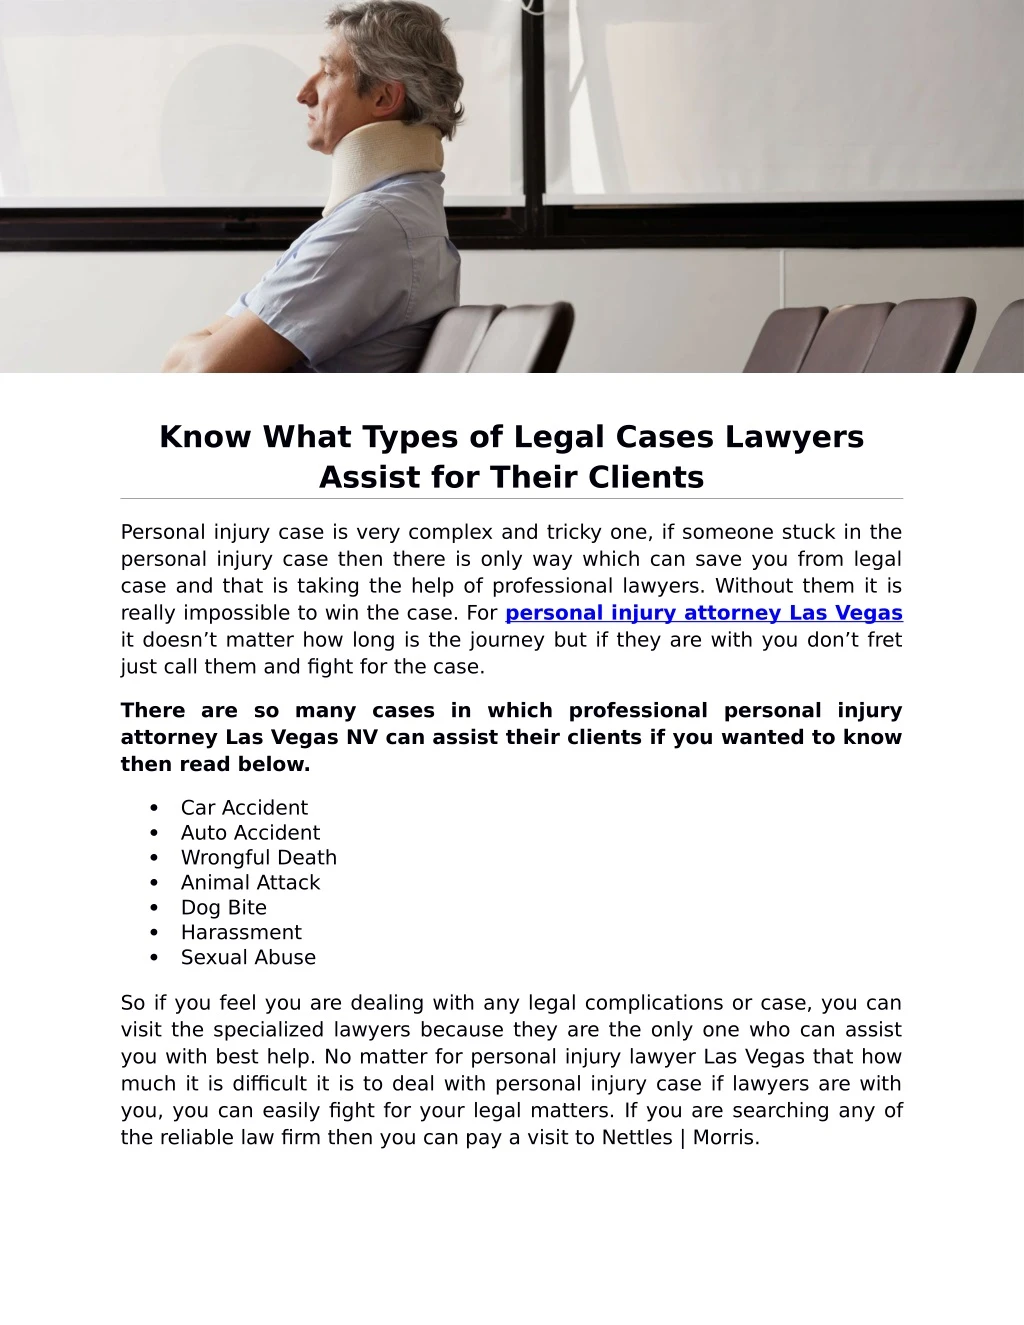 know what types of legal cases lawyers assist